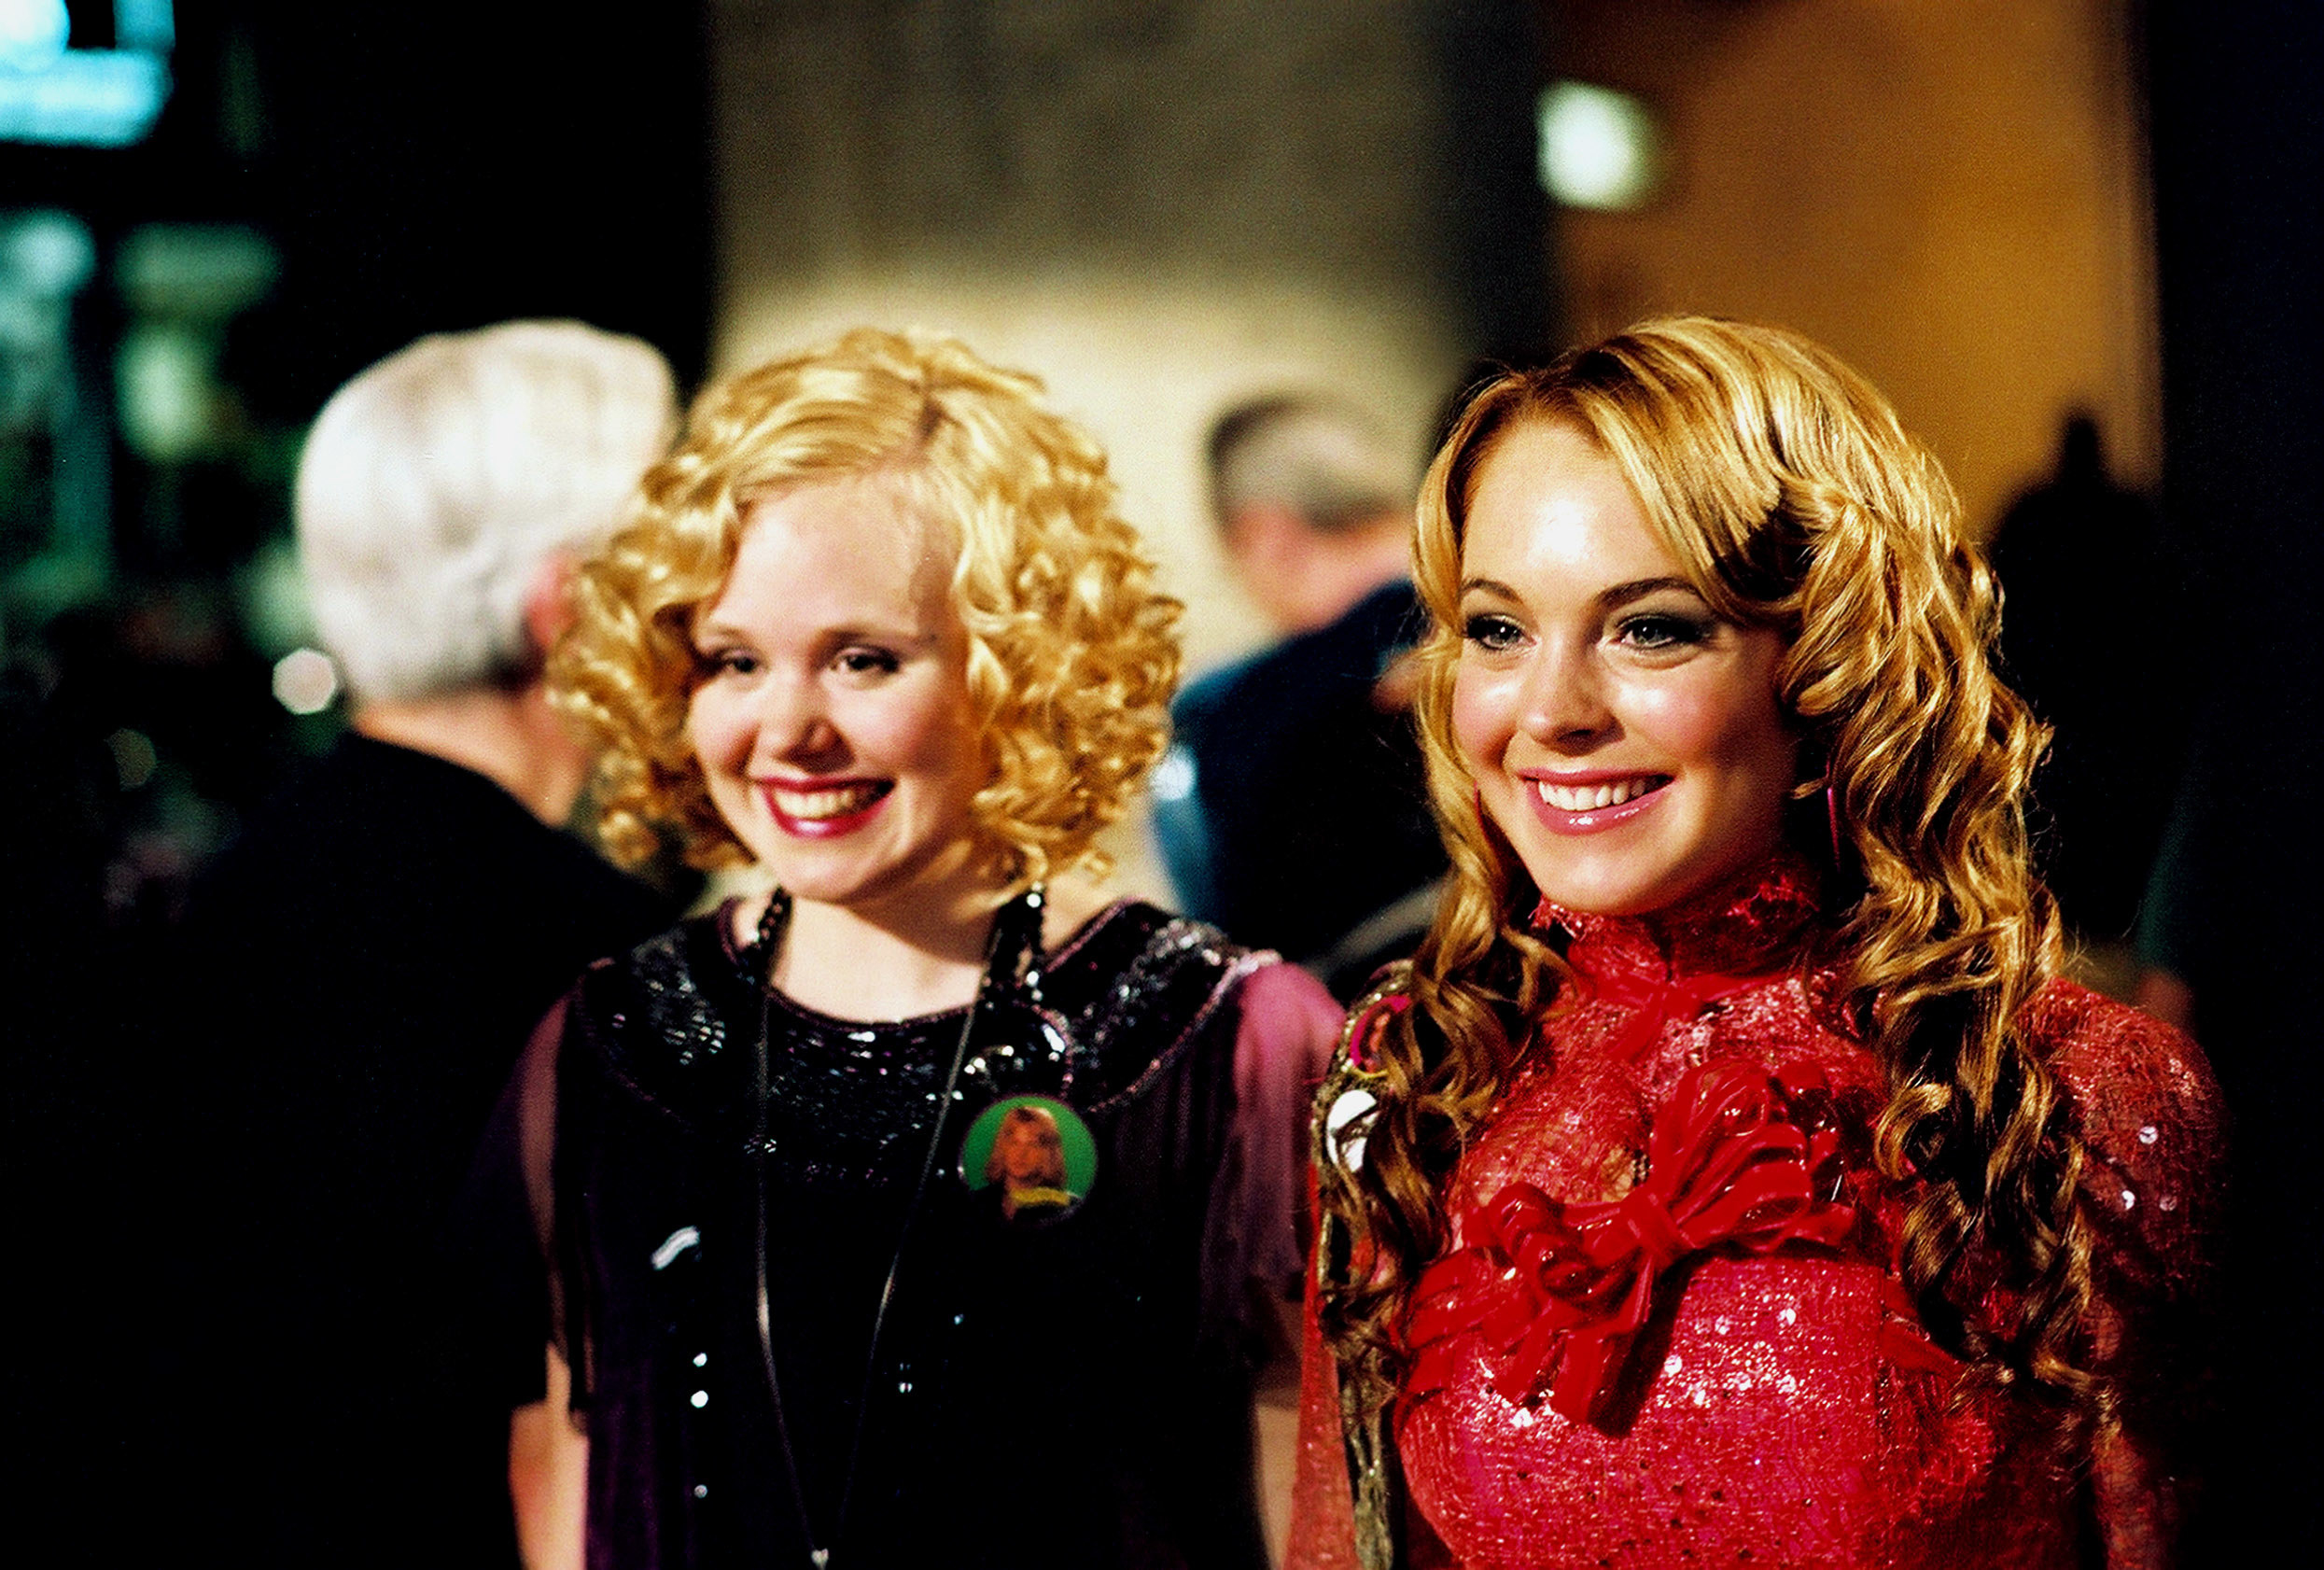 Alison Pill and Lindsay Lohan in CONFESSIONS OF A TEENAGE DRAMA QUEEN